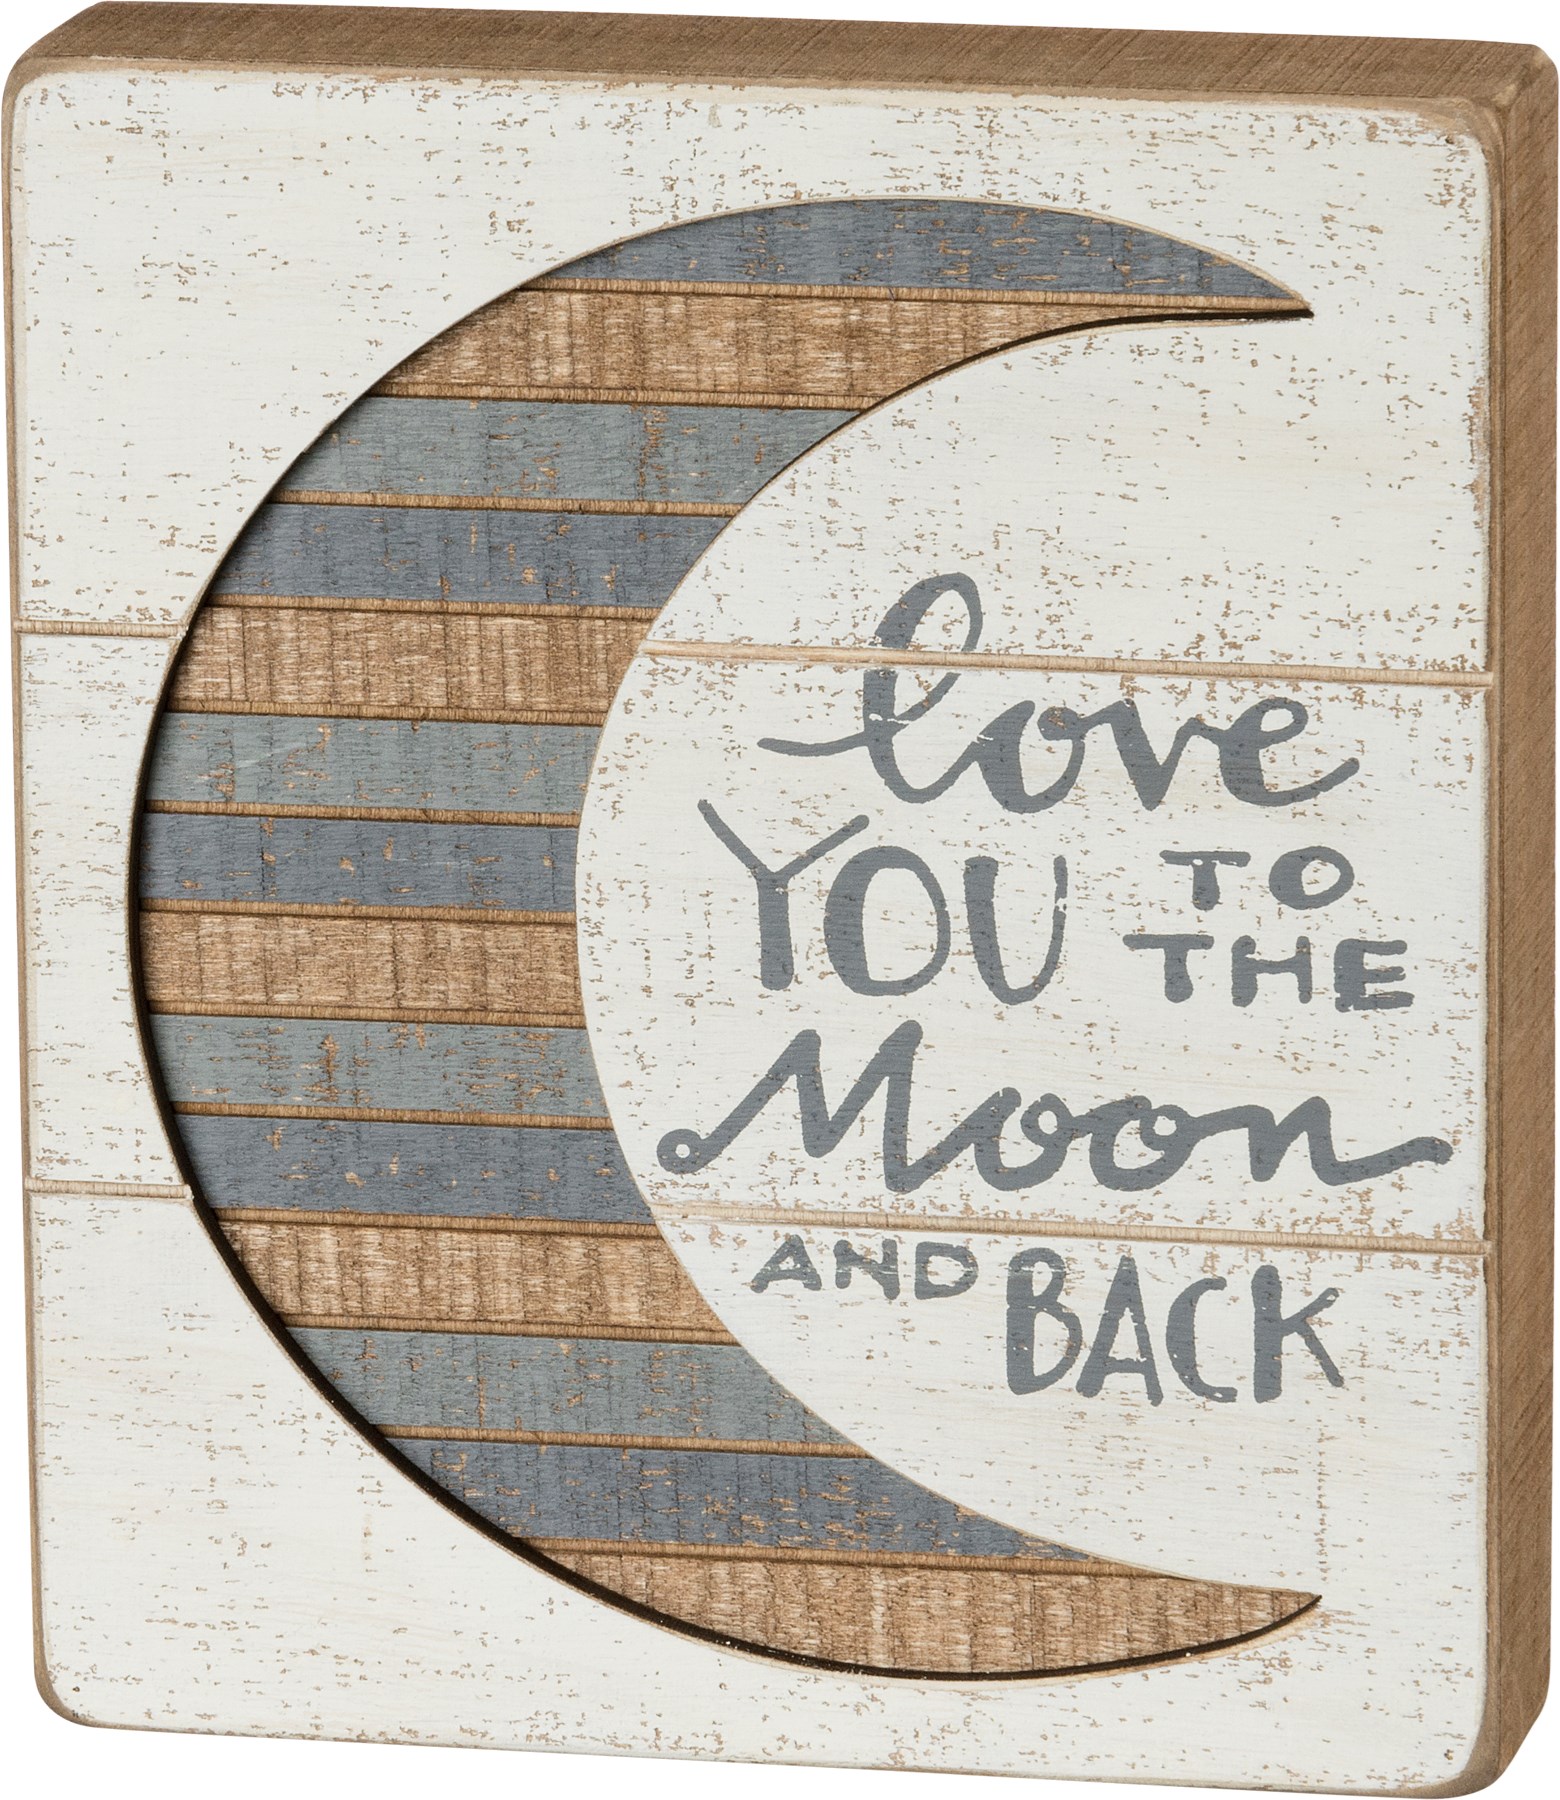 NEW~PRIMITIVE WOOD SIGN~"Love You Up To The Sky To The Stars & The Moon...~Heart